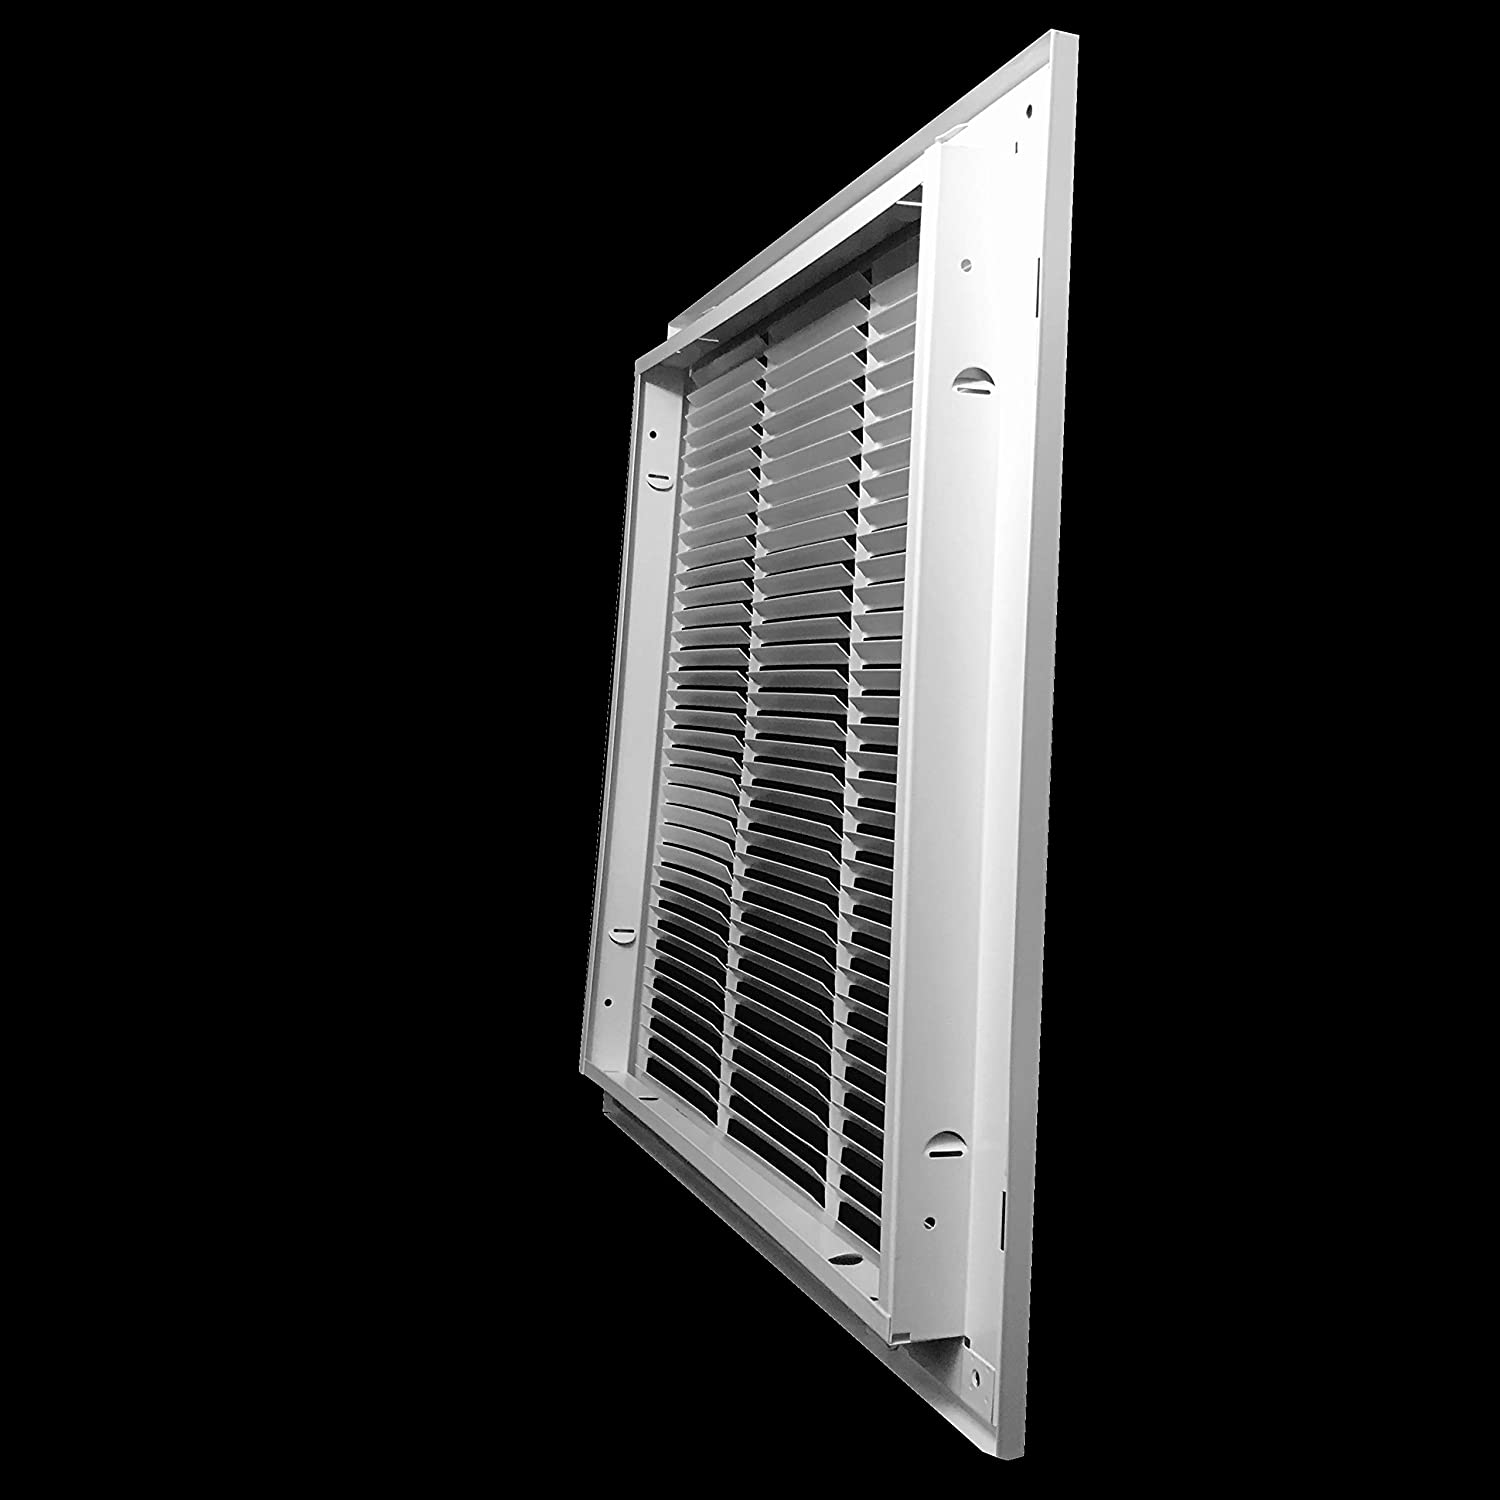 24" X 24" Duct Opening | Steel Return Air Filter Grille for Sidewall and Ceiling